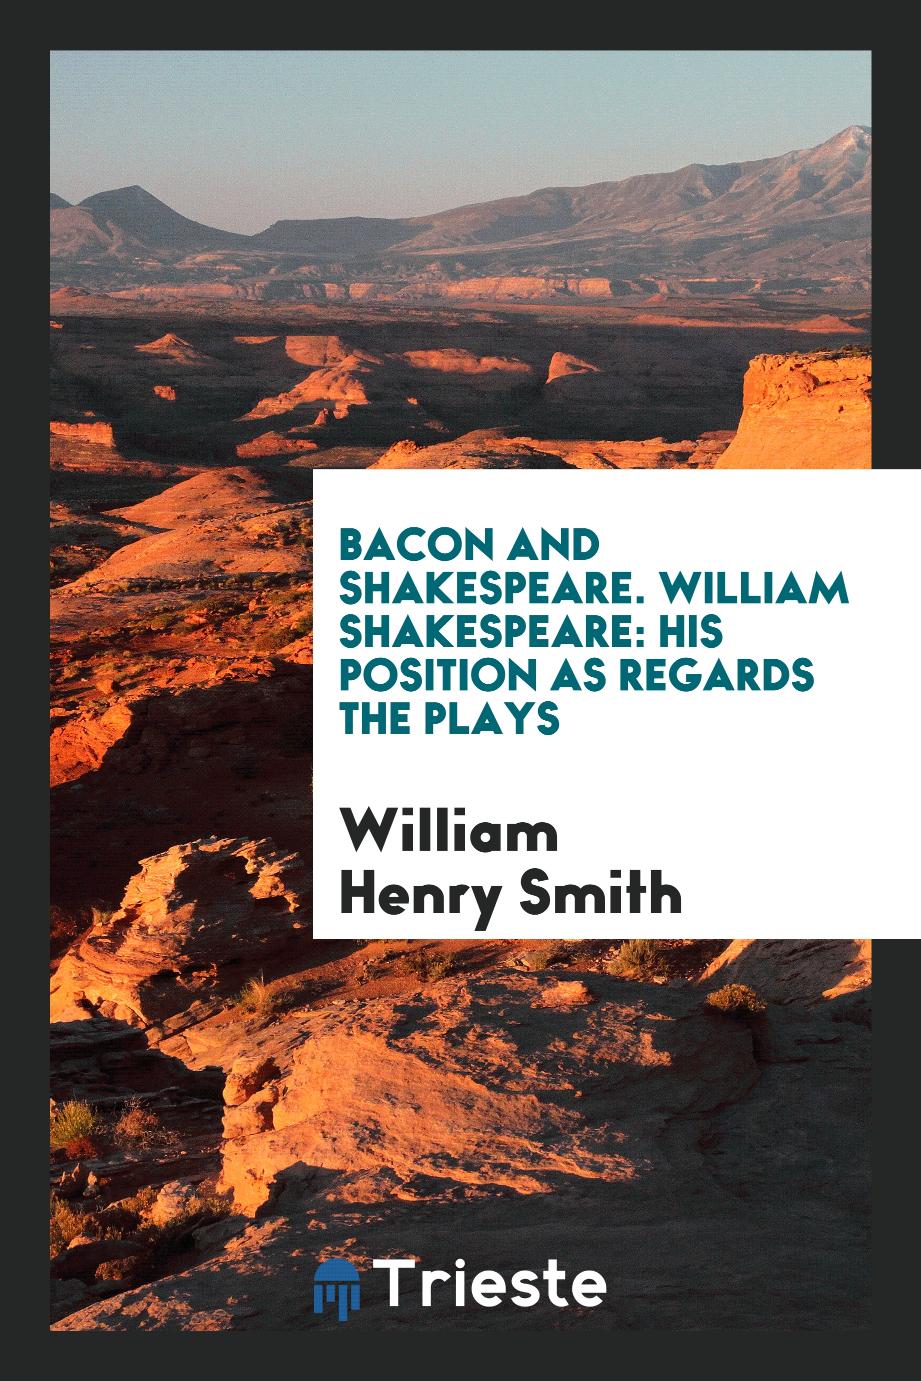 Bacon and Shakespeare. William Shakespeare: his position as regards the plays